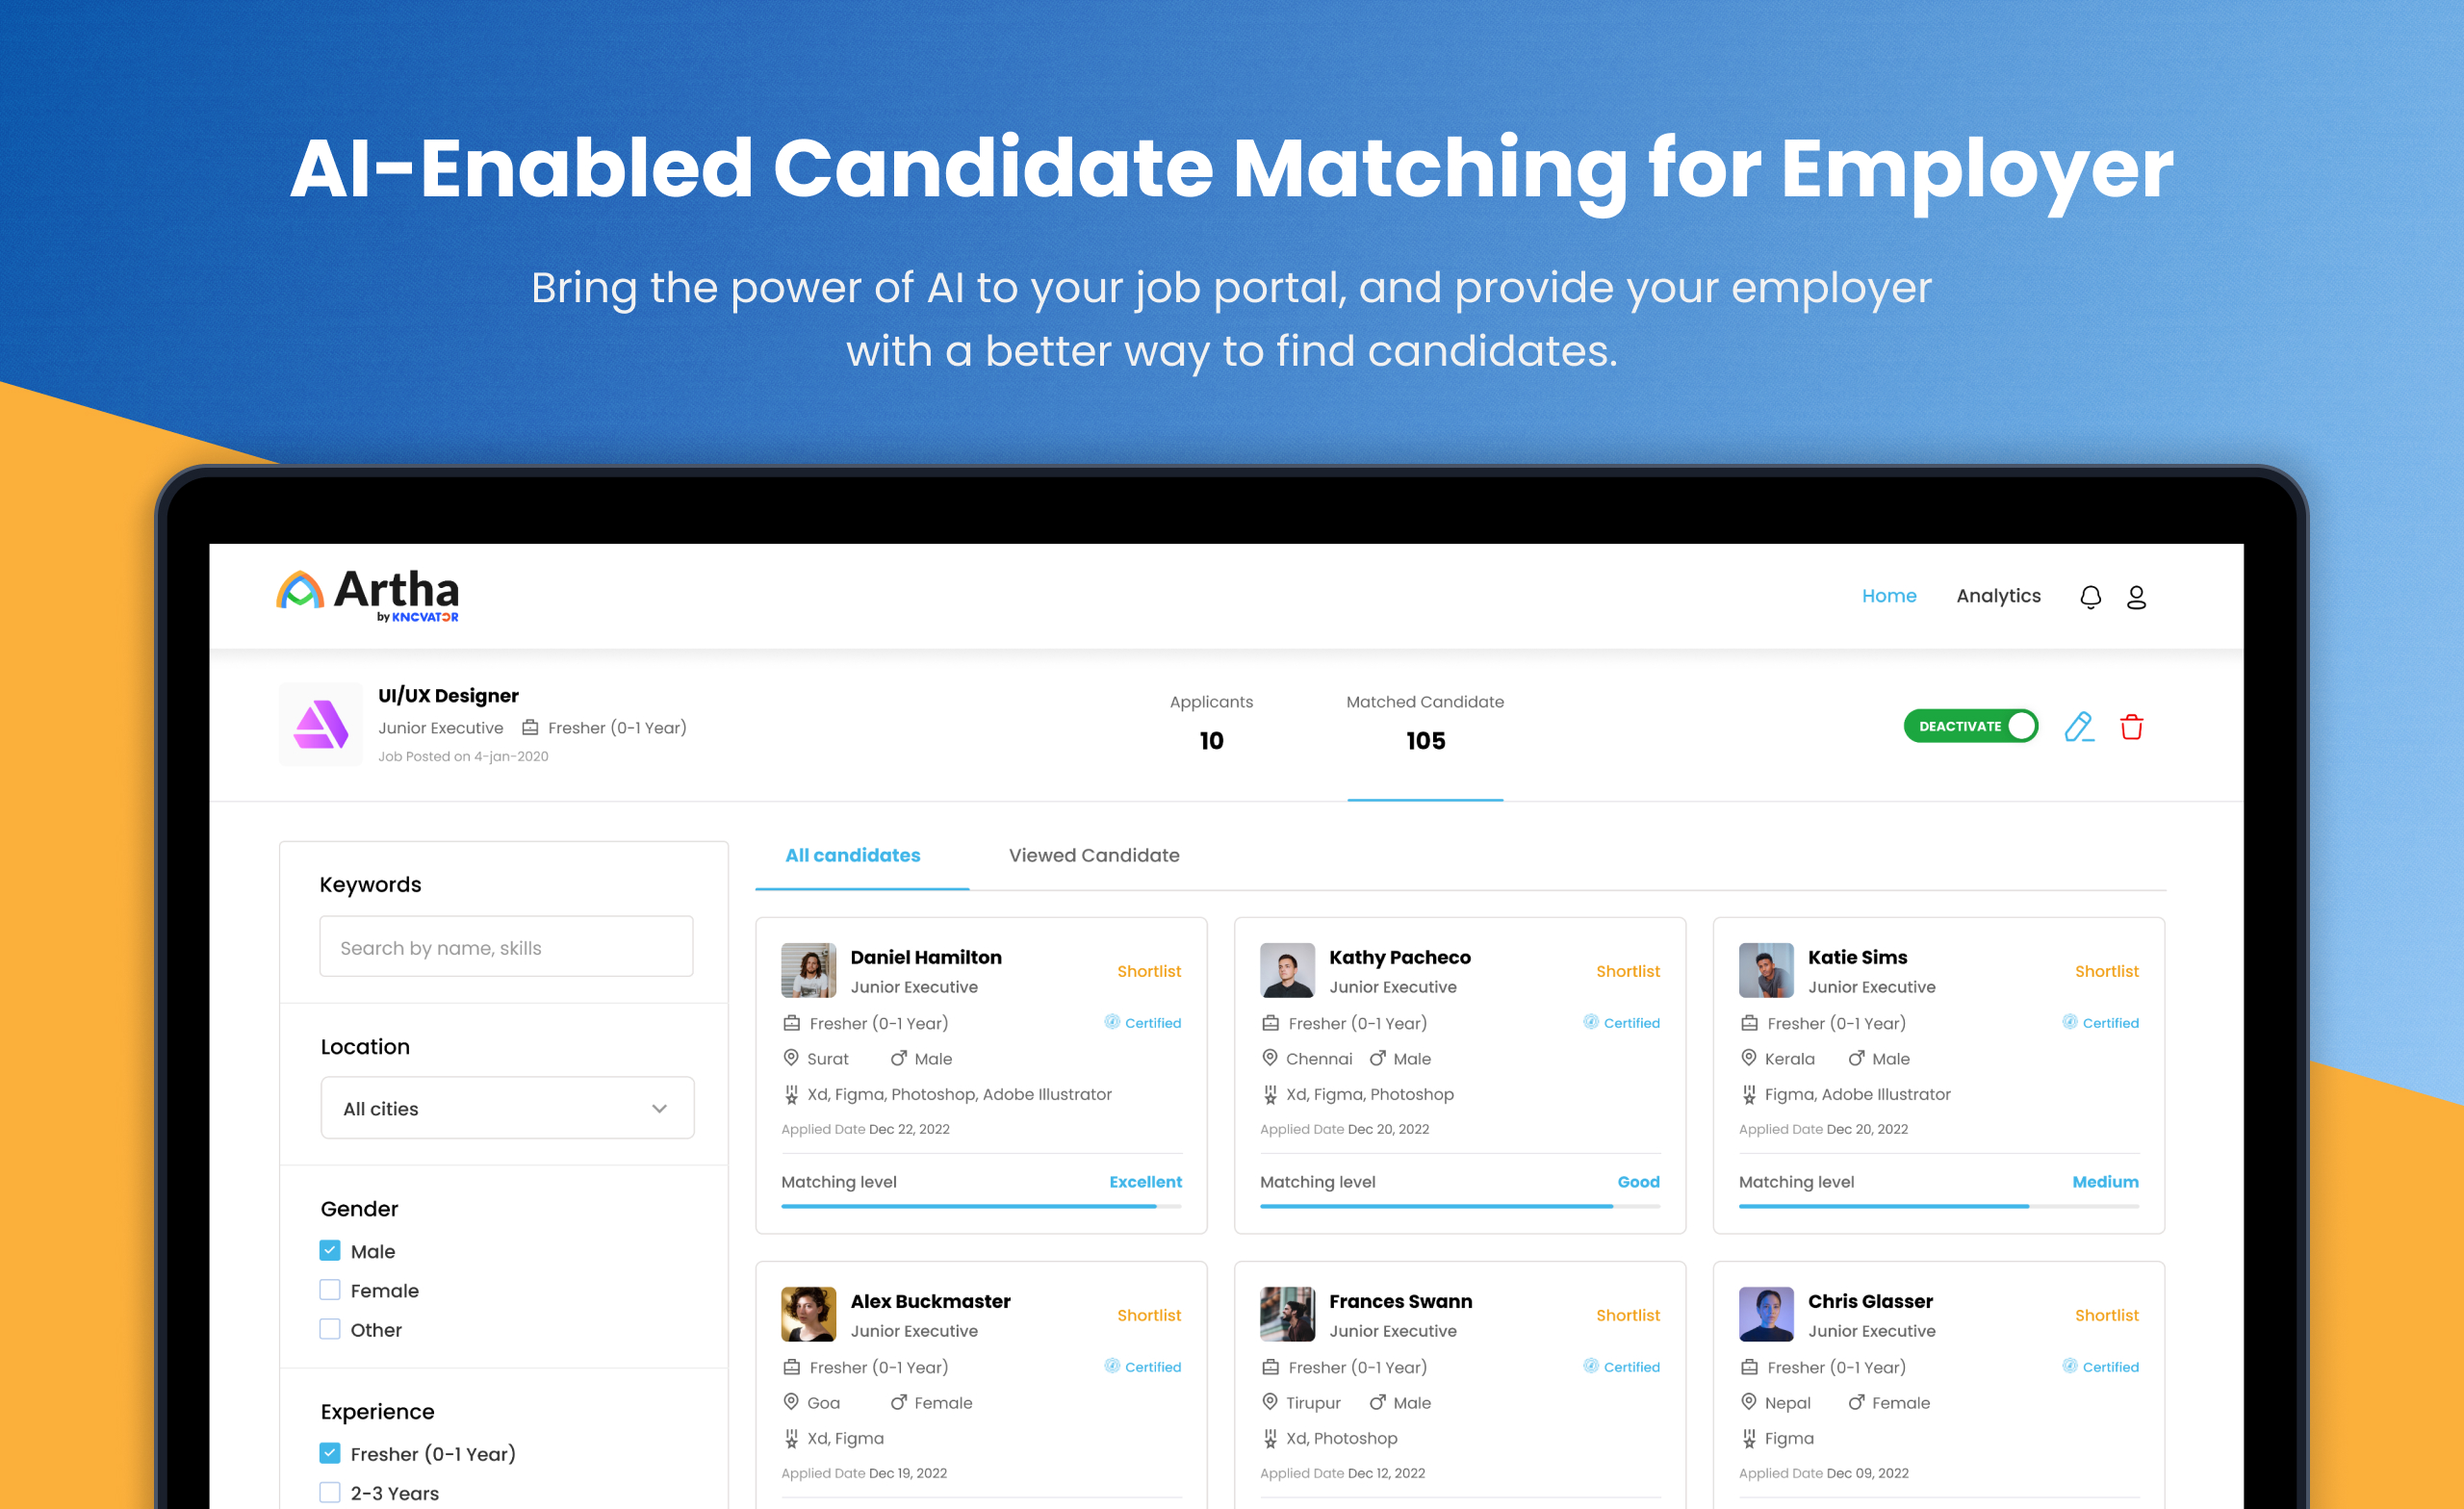 AI-Enabled Candidate Matching for Employer
Bring the power of AI to your job portal, and provide your employer with a better way to find candidates.